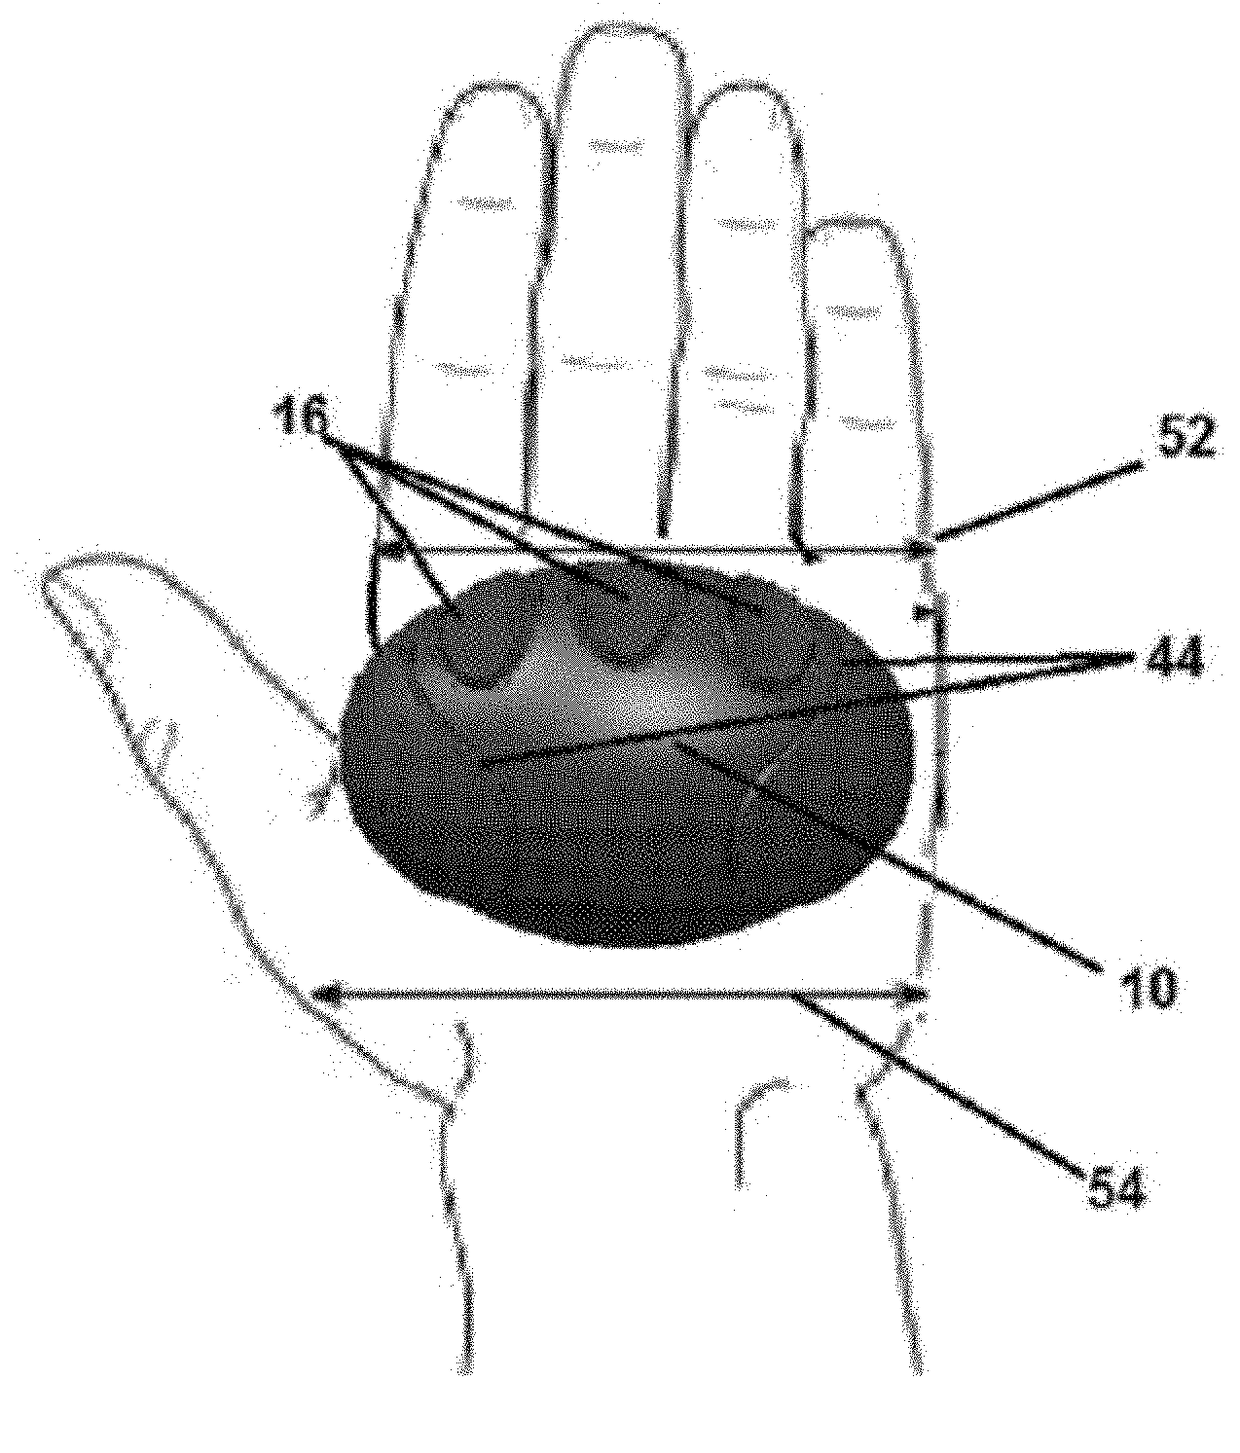 Ergonomic held weight units, related computing device applications and methods of use